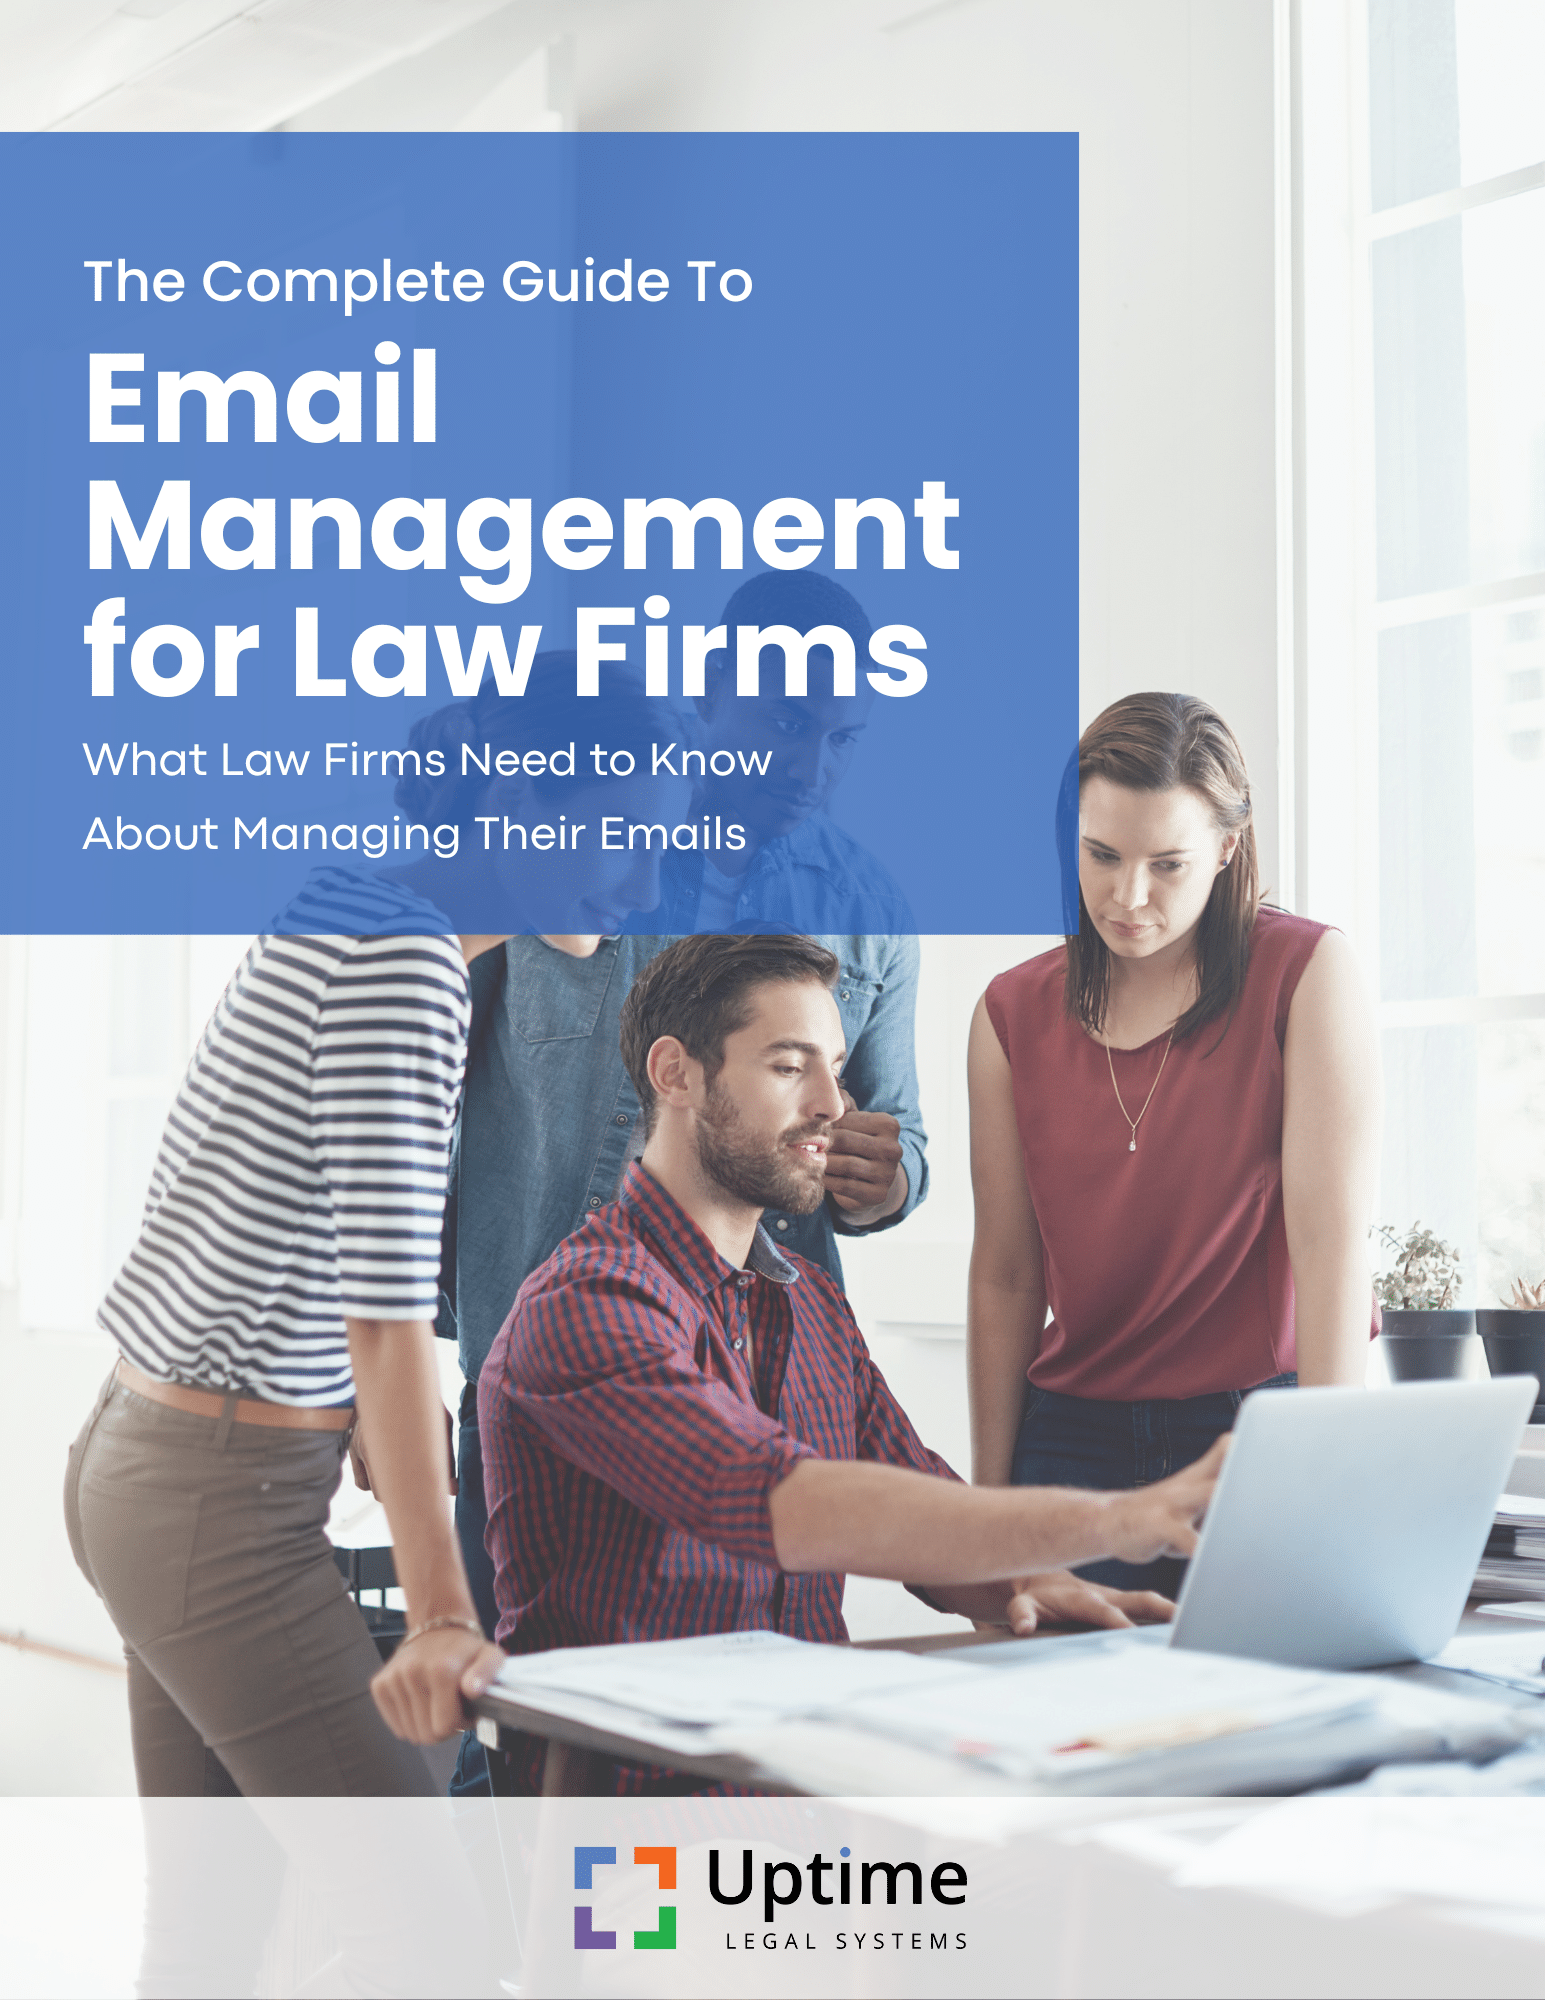 Email Management for Law Firms - Guide Thumbnail